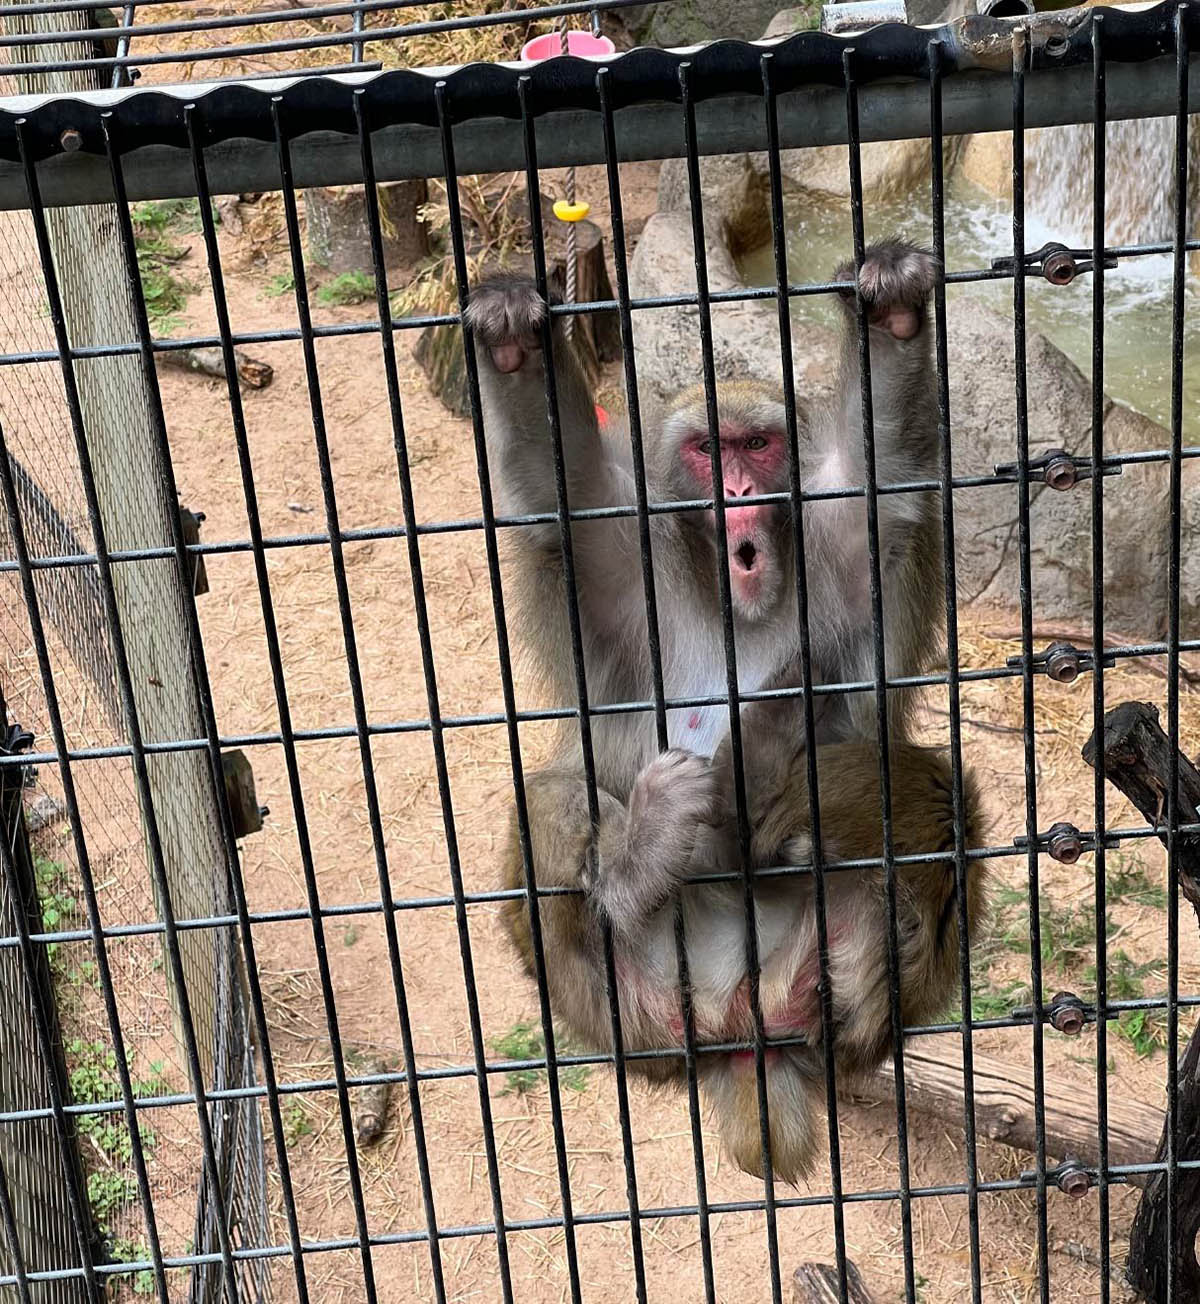 Snow Monkey hanging on cage walls